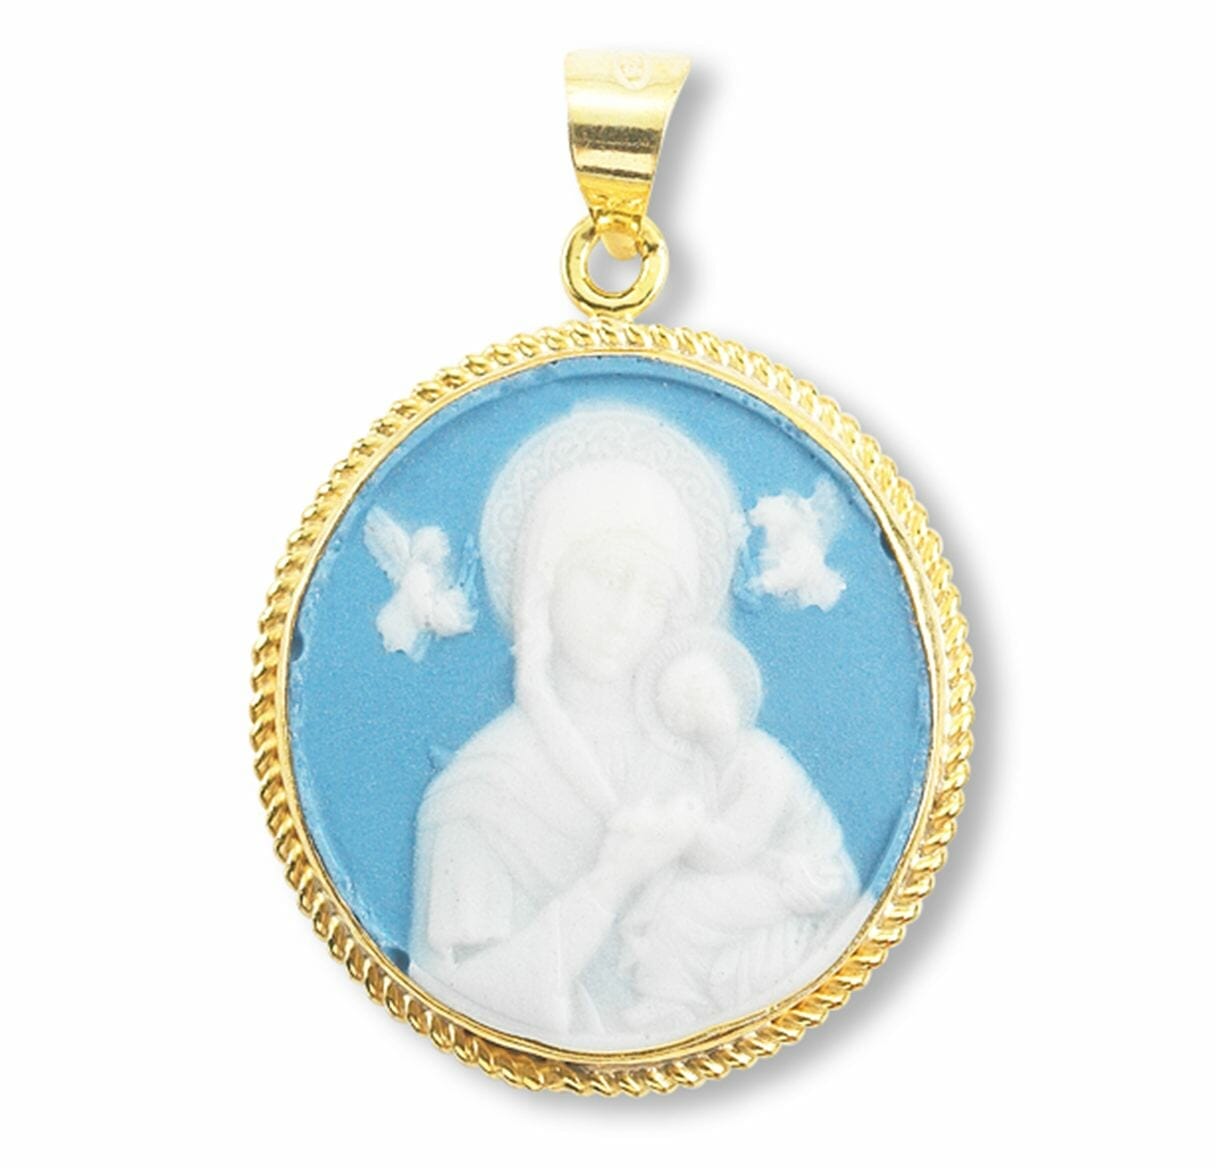 Cameo Medals - Buy Religious